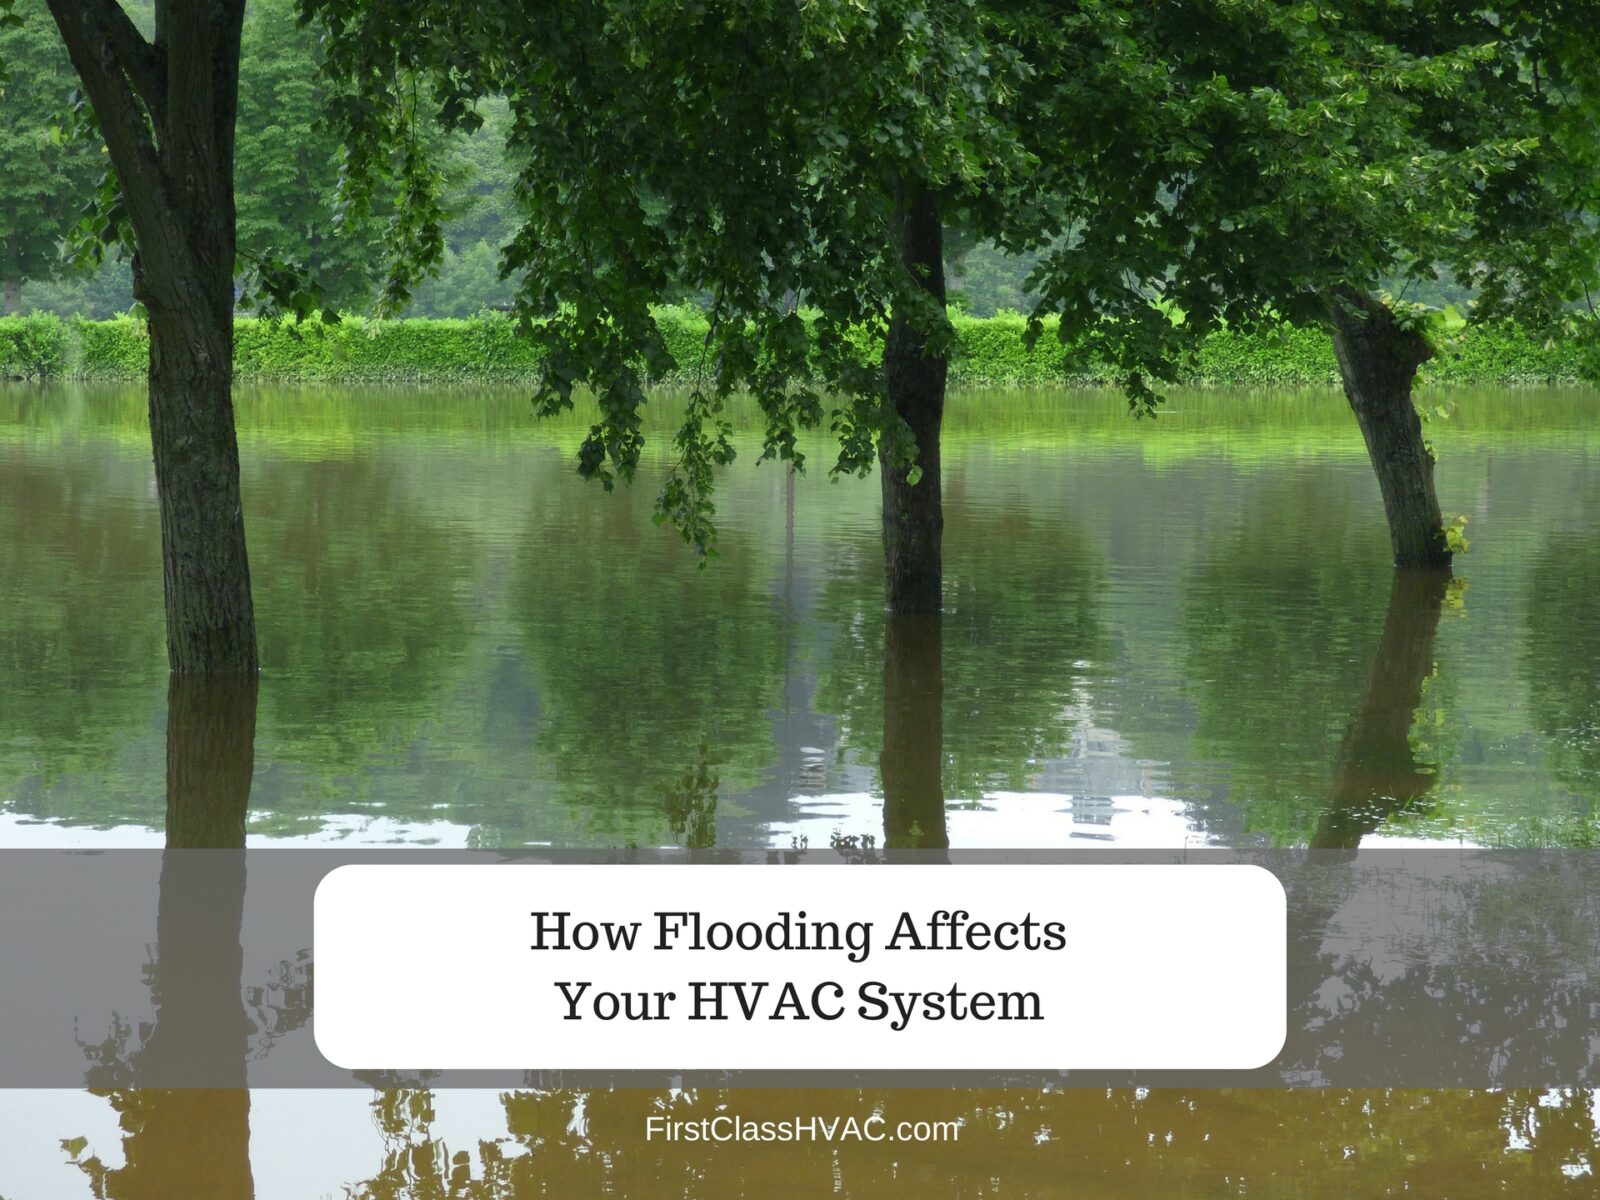 HOW FLOODING AFFECTS YOUR HVAC SYSTEM